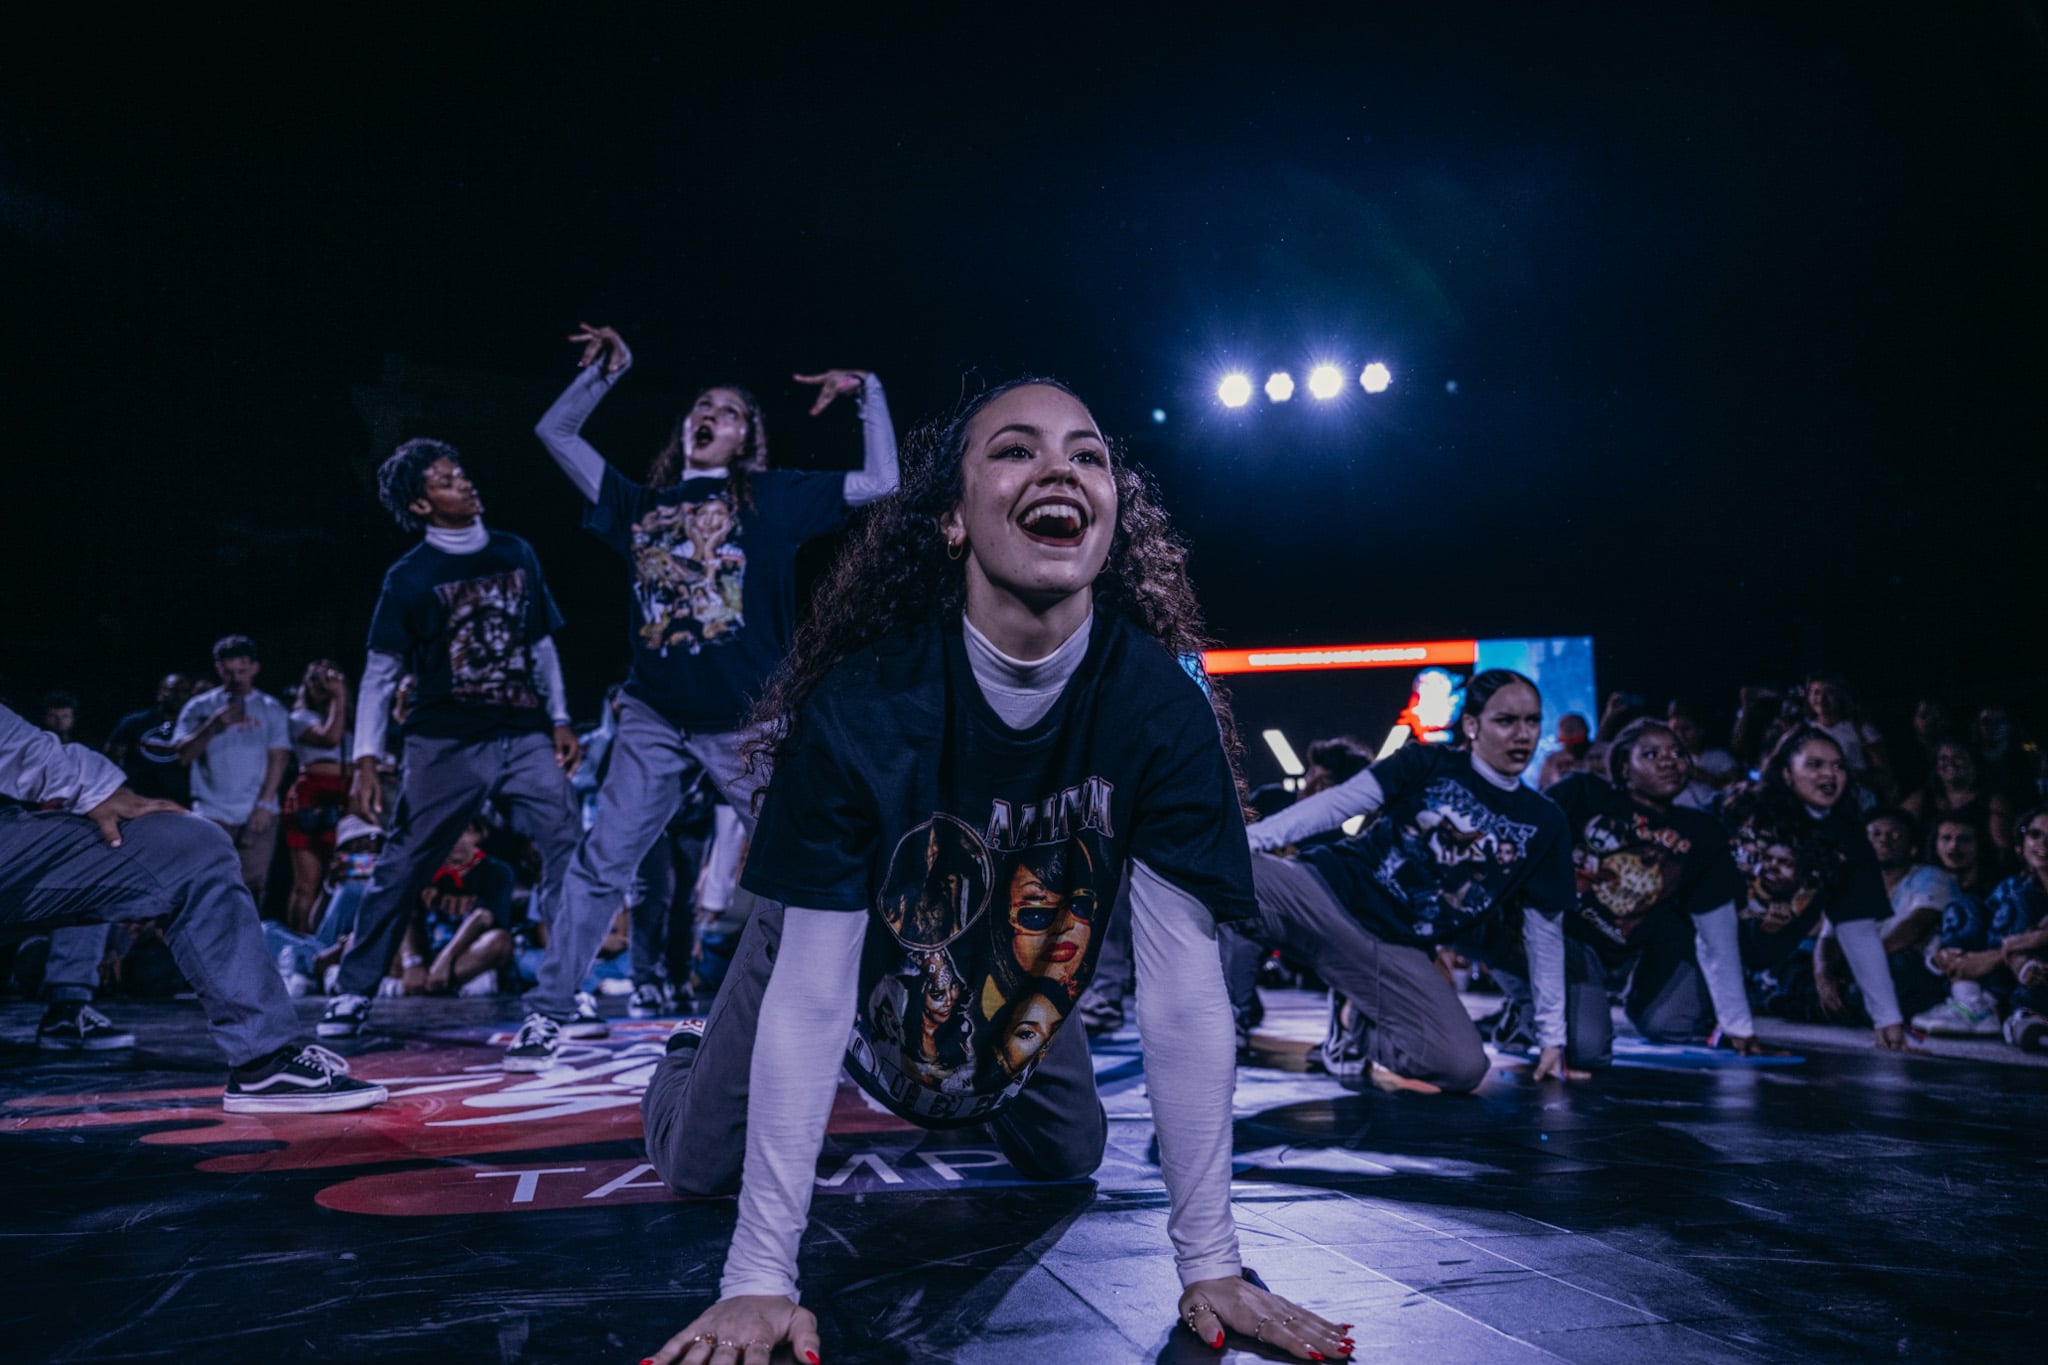 How Street-Style Dance Changed 3 Performers’ Lives